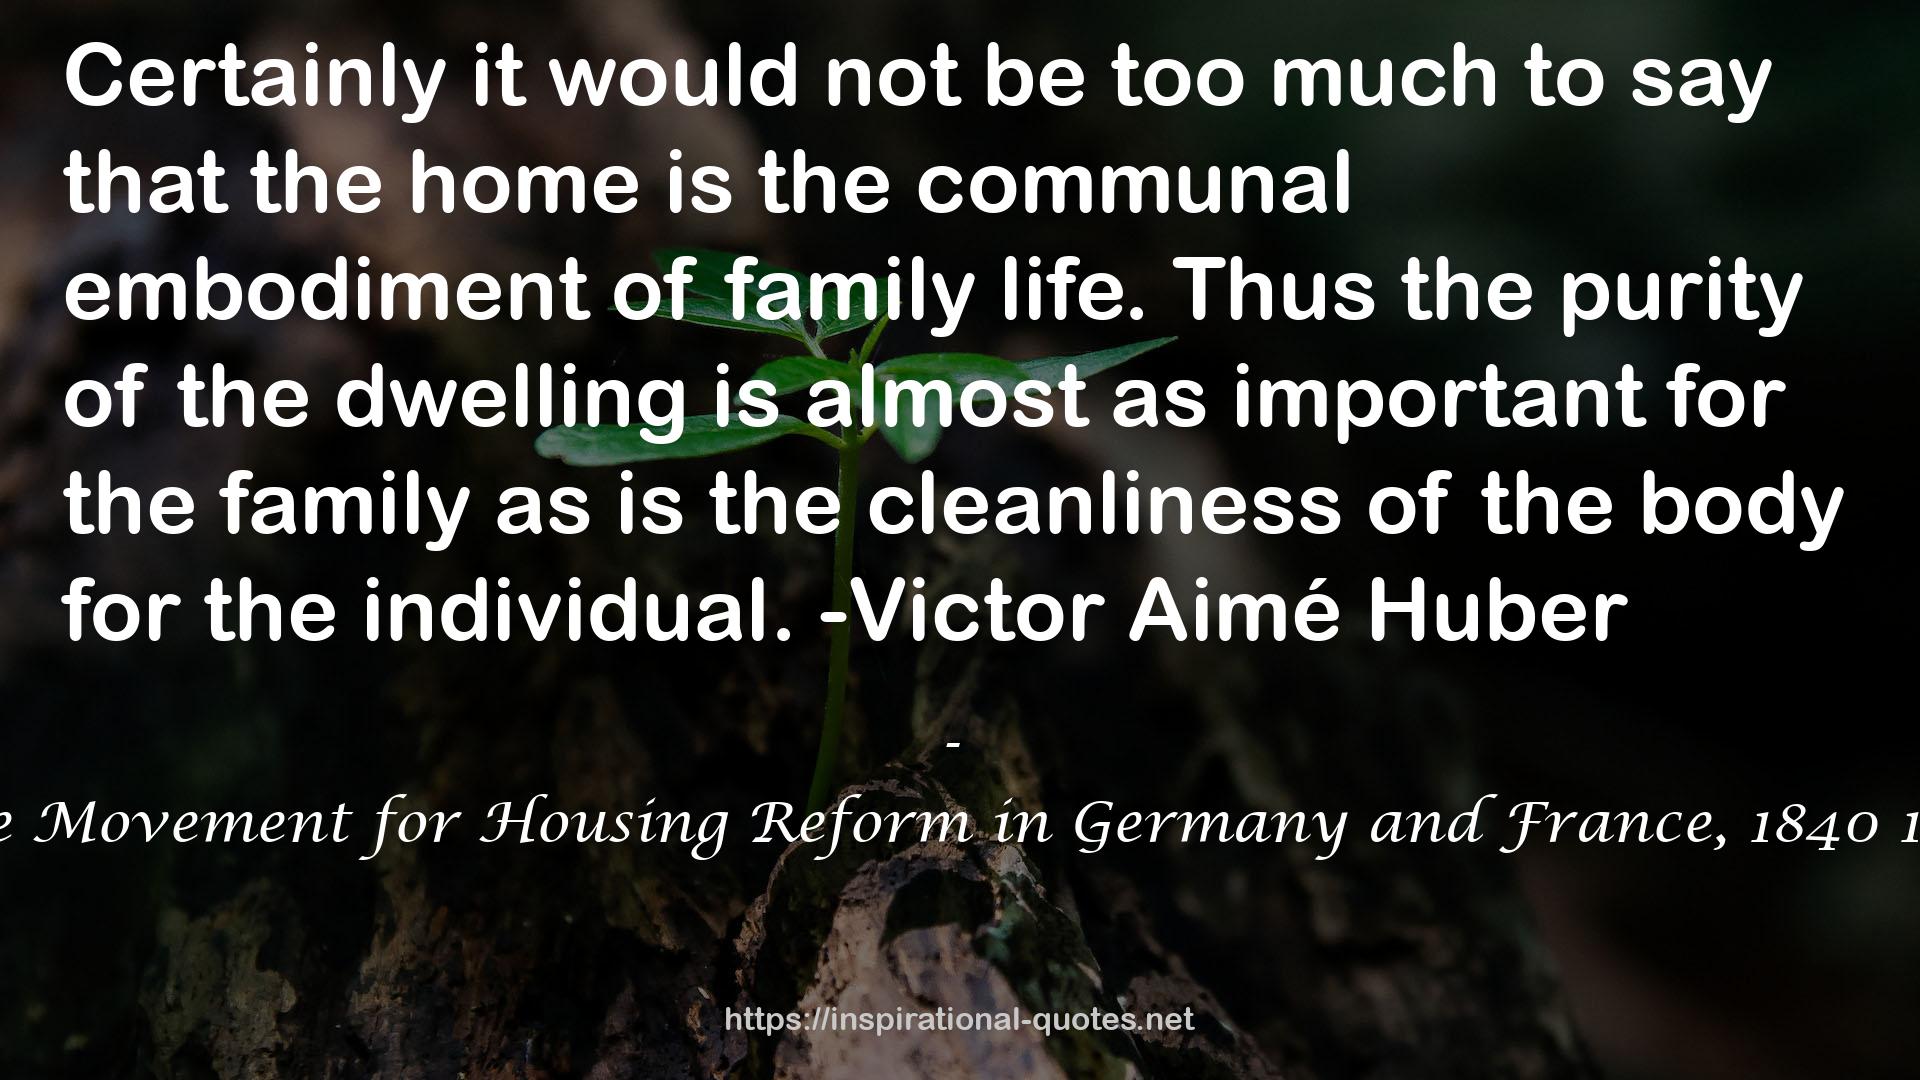 The Movement for Housing Reform in Germany and France, 1840 1914 QUOTES